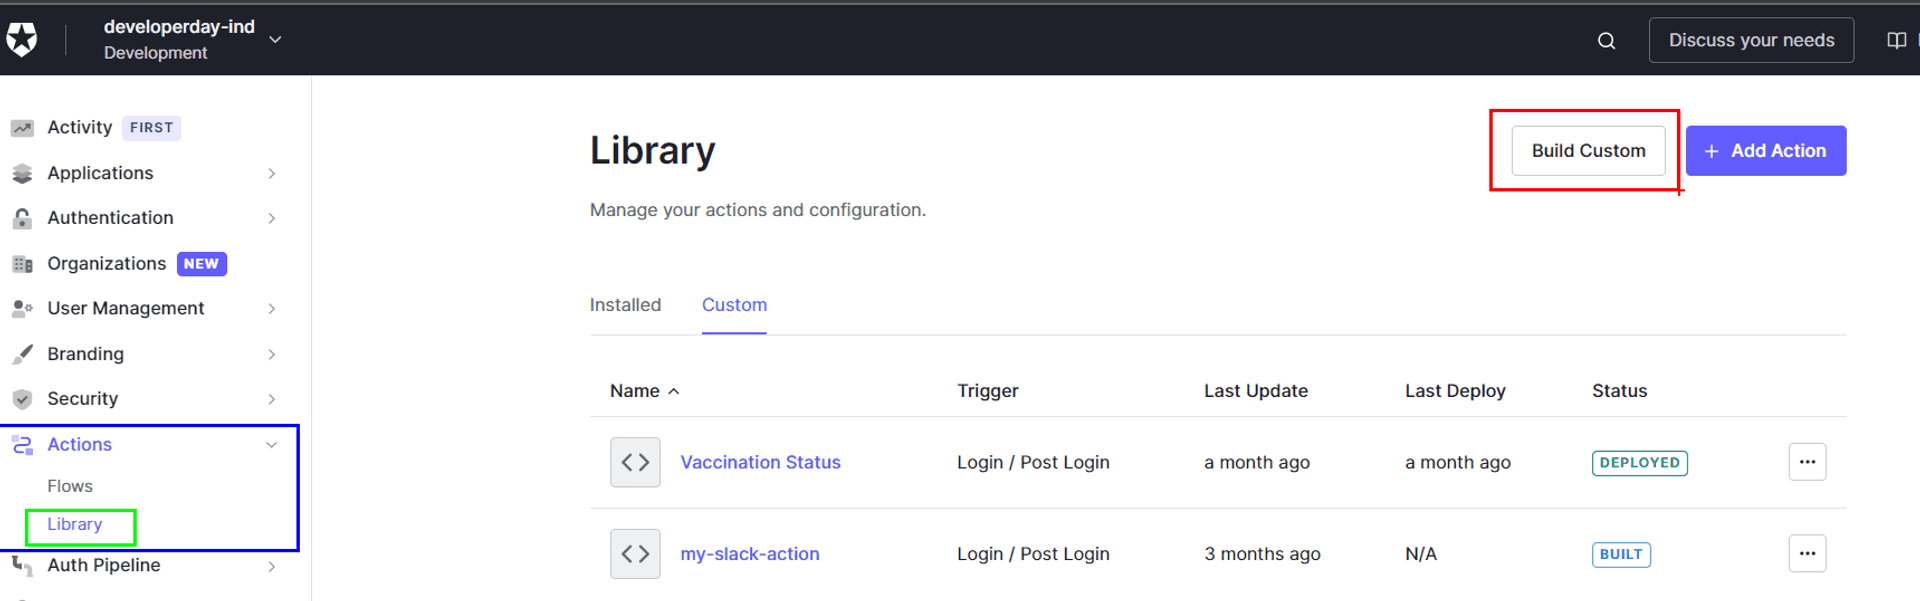 Auth0 Page with a button named "Build Custom" alongside another button to "Add Action; below them a table of existing actions